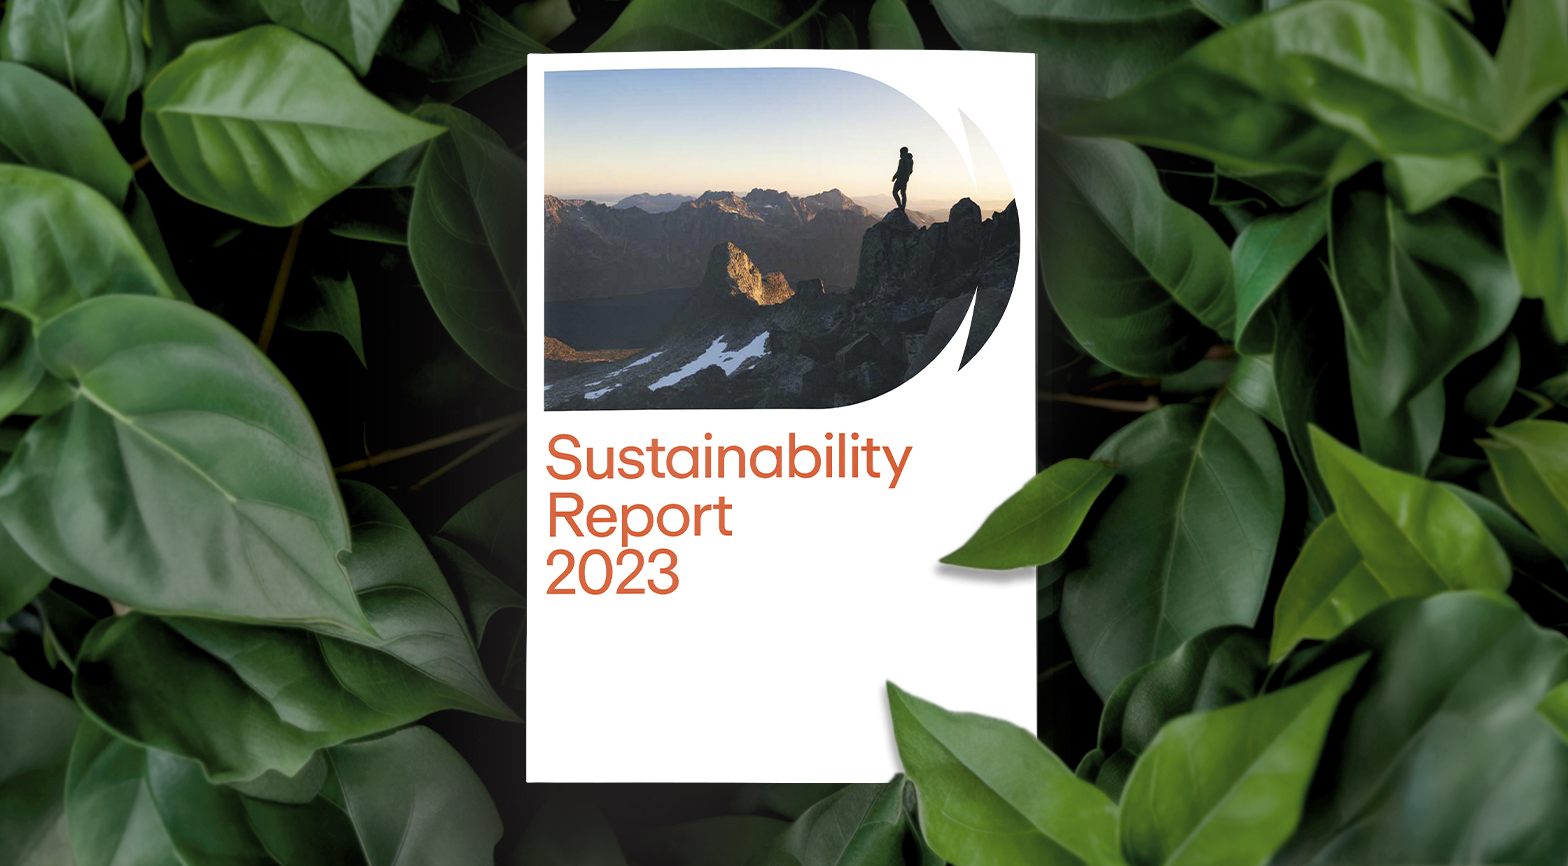 THE GROUP’S 2023 SUSTAINABILITY REPORT WAS PRESENTED